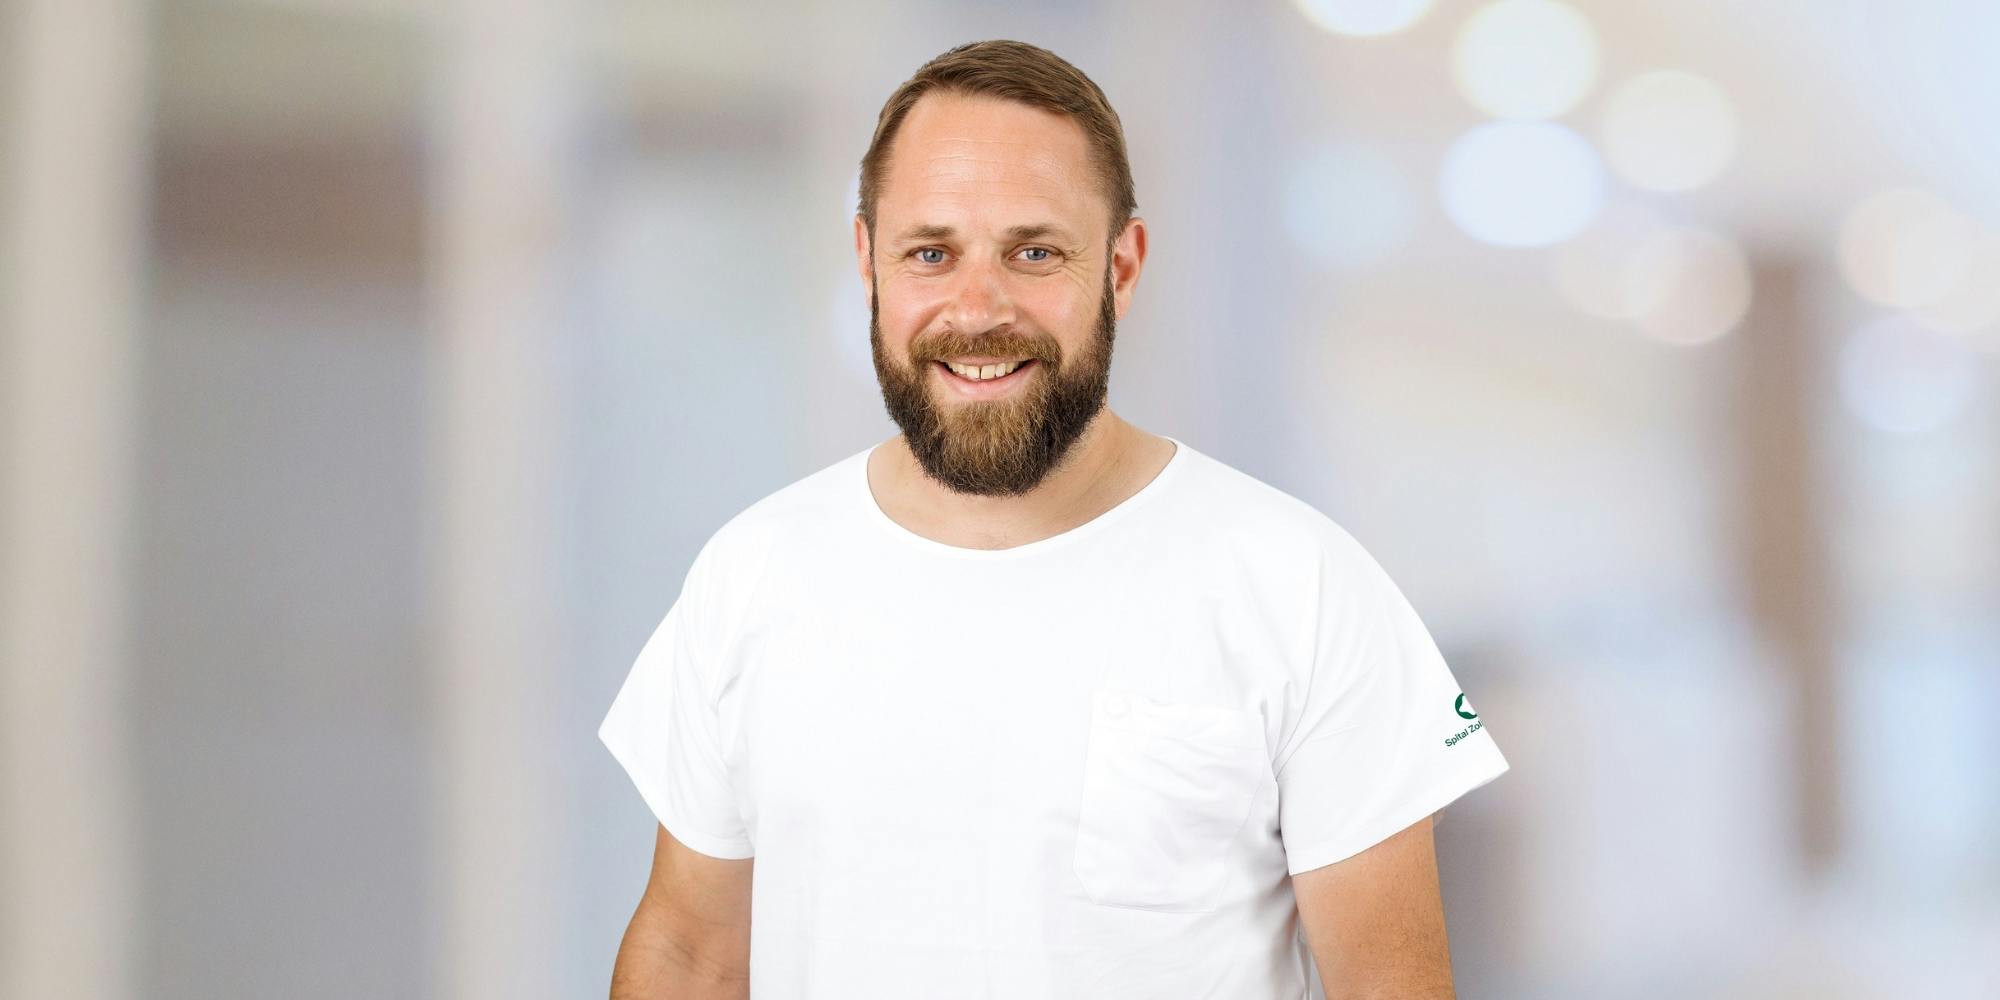 Smiling man with a beard in a white T-shirt against a blurred background.